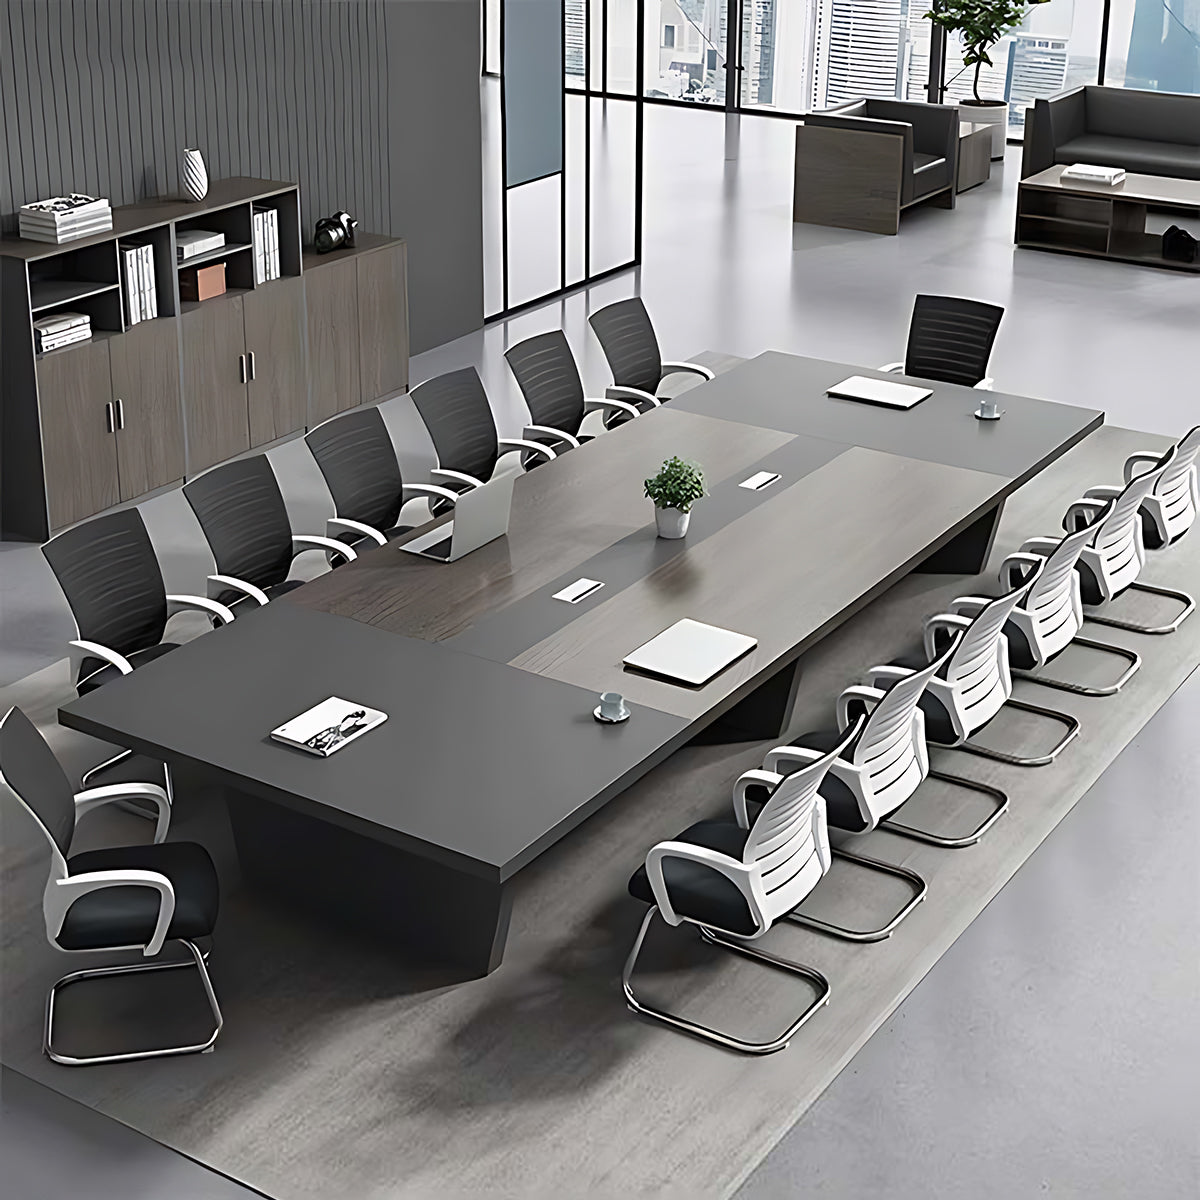 Modern Simple Long Conference Table(West Coast)